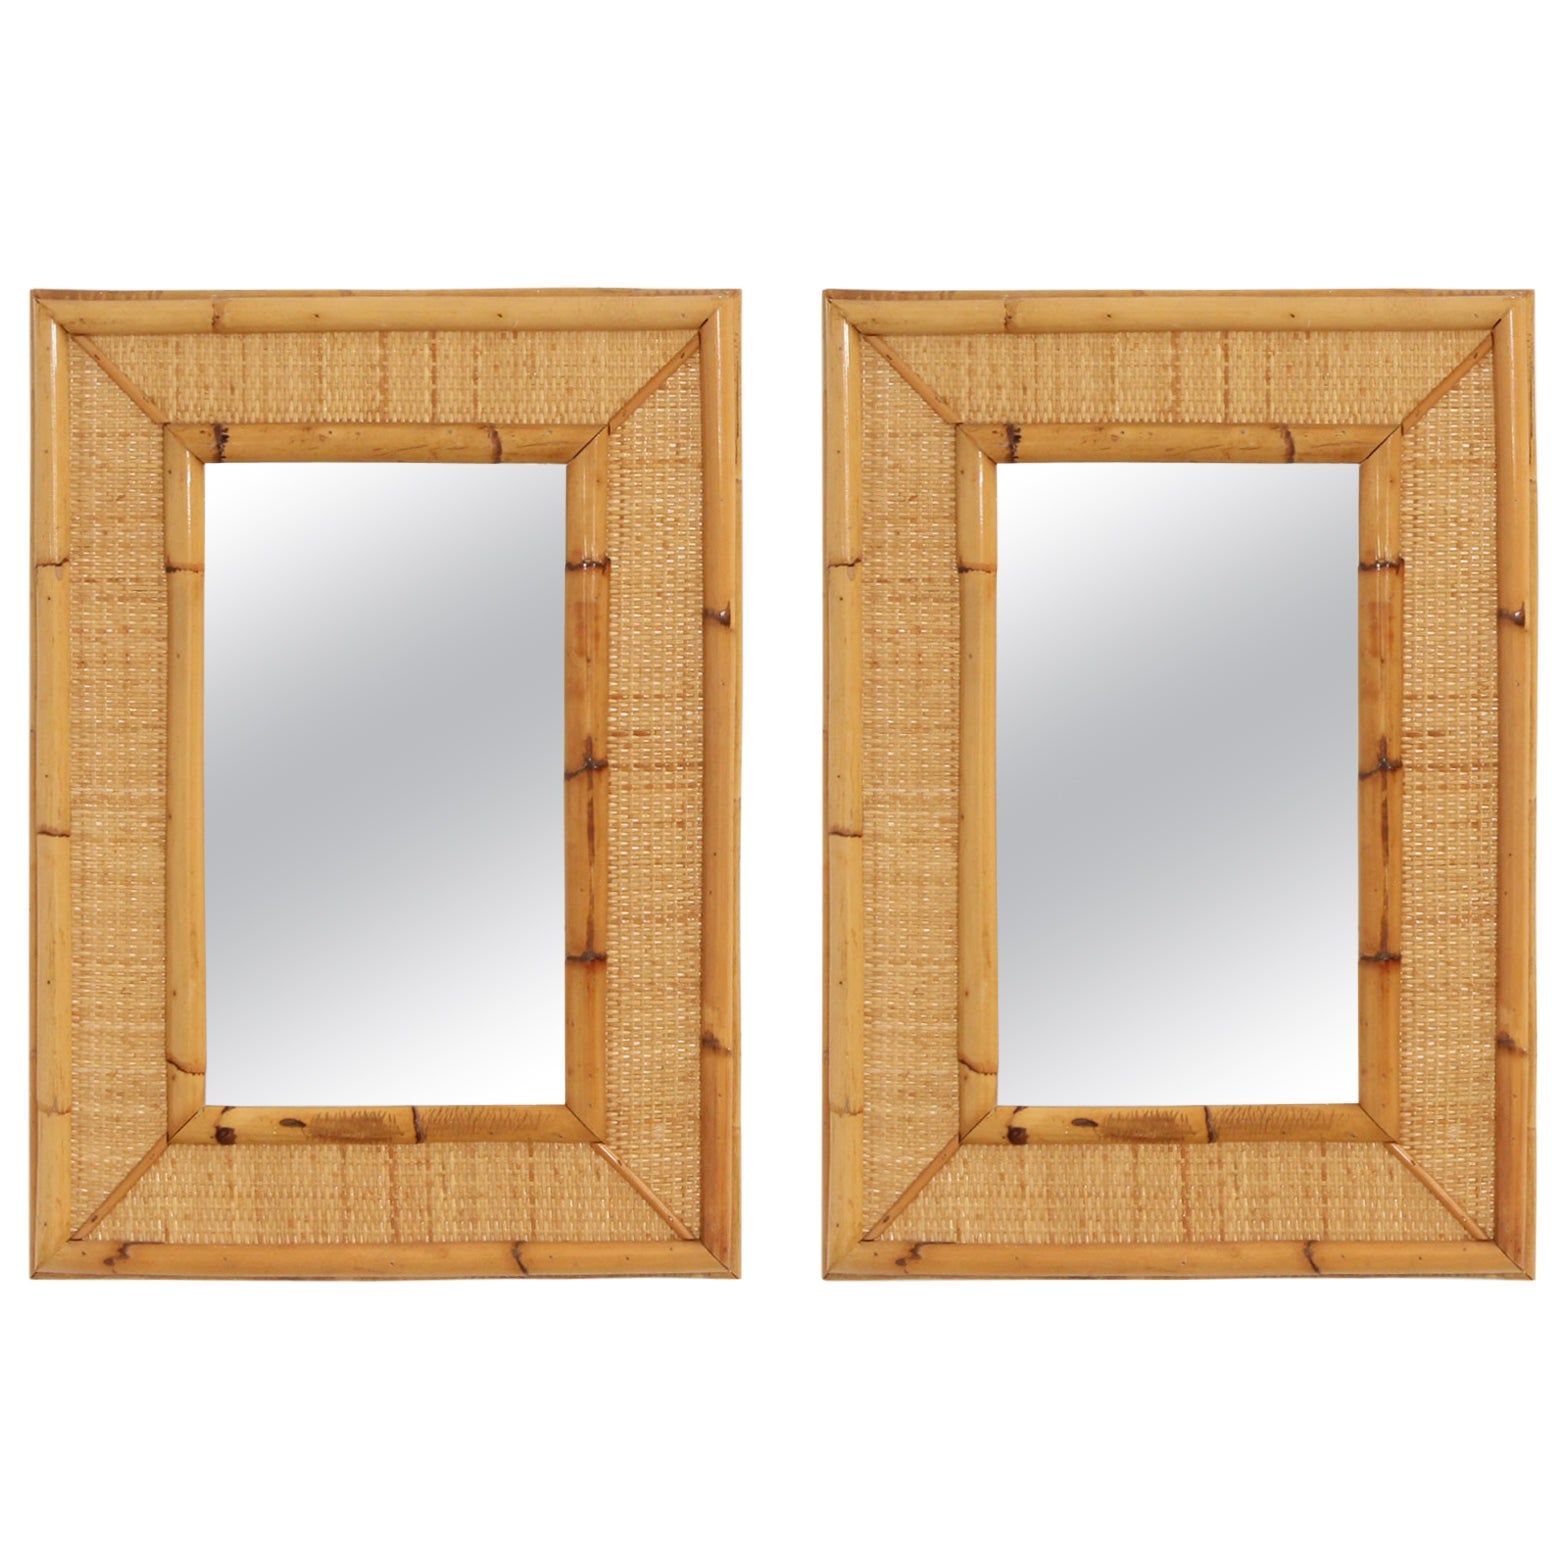 Rattan and Cane Wall Mirrors from 1970's, Spain